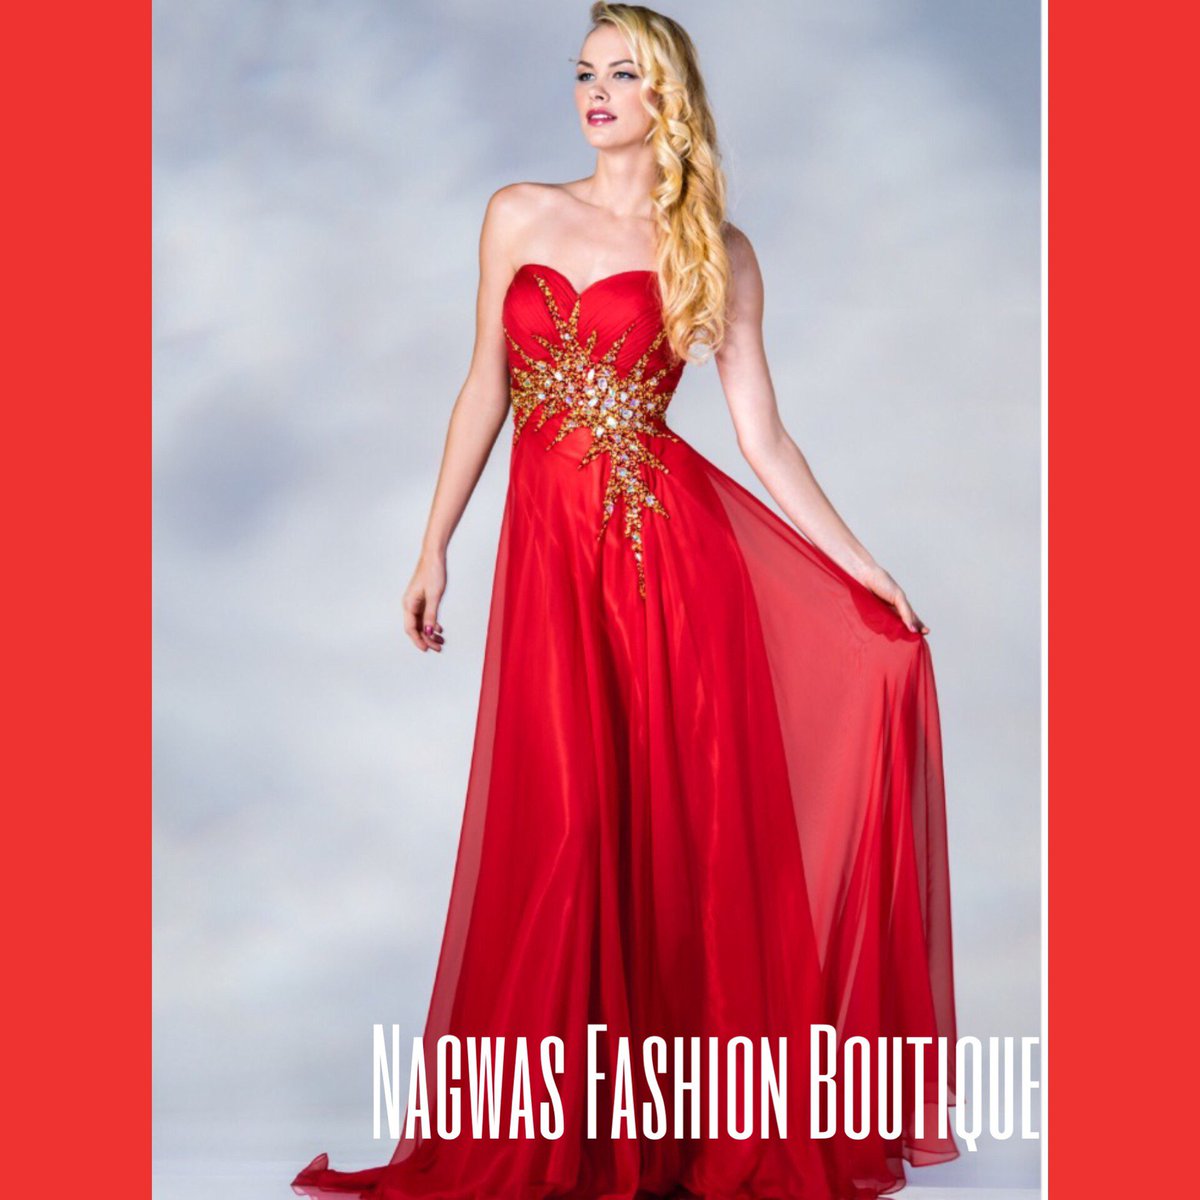 #NagwasFashionBoutique has #designer collections, true #elegant styles that are affordable. Shop #Nagwas for evening wear and #chic looks!